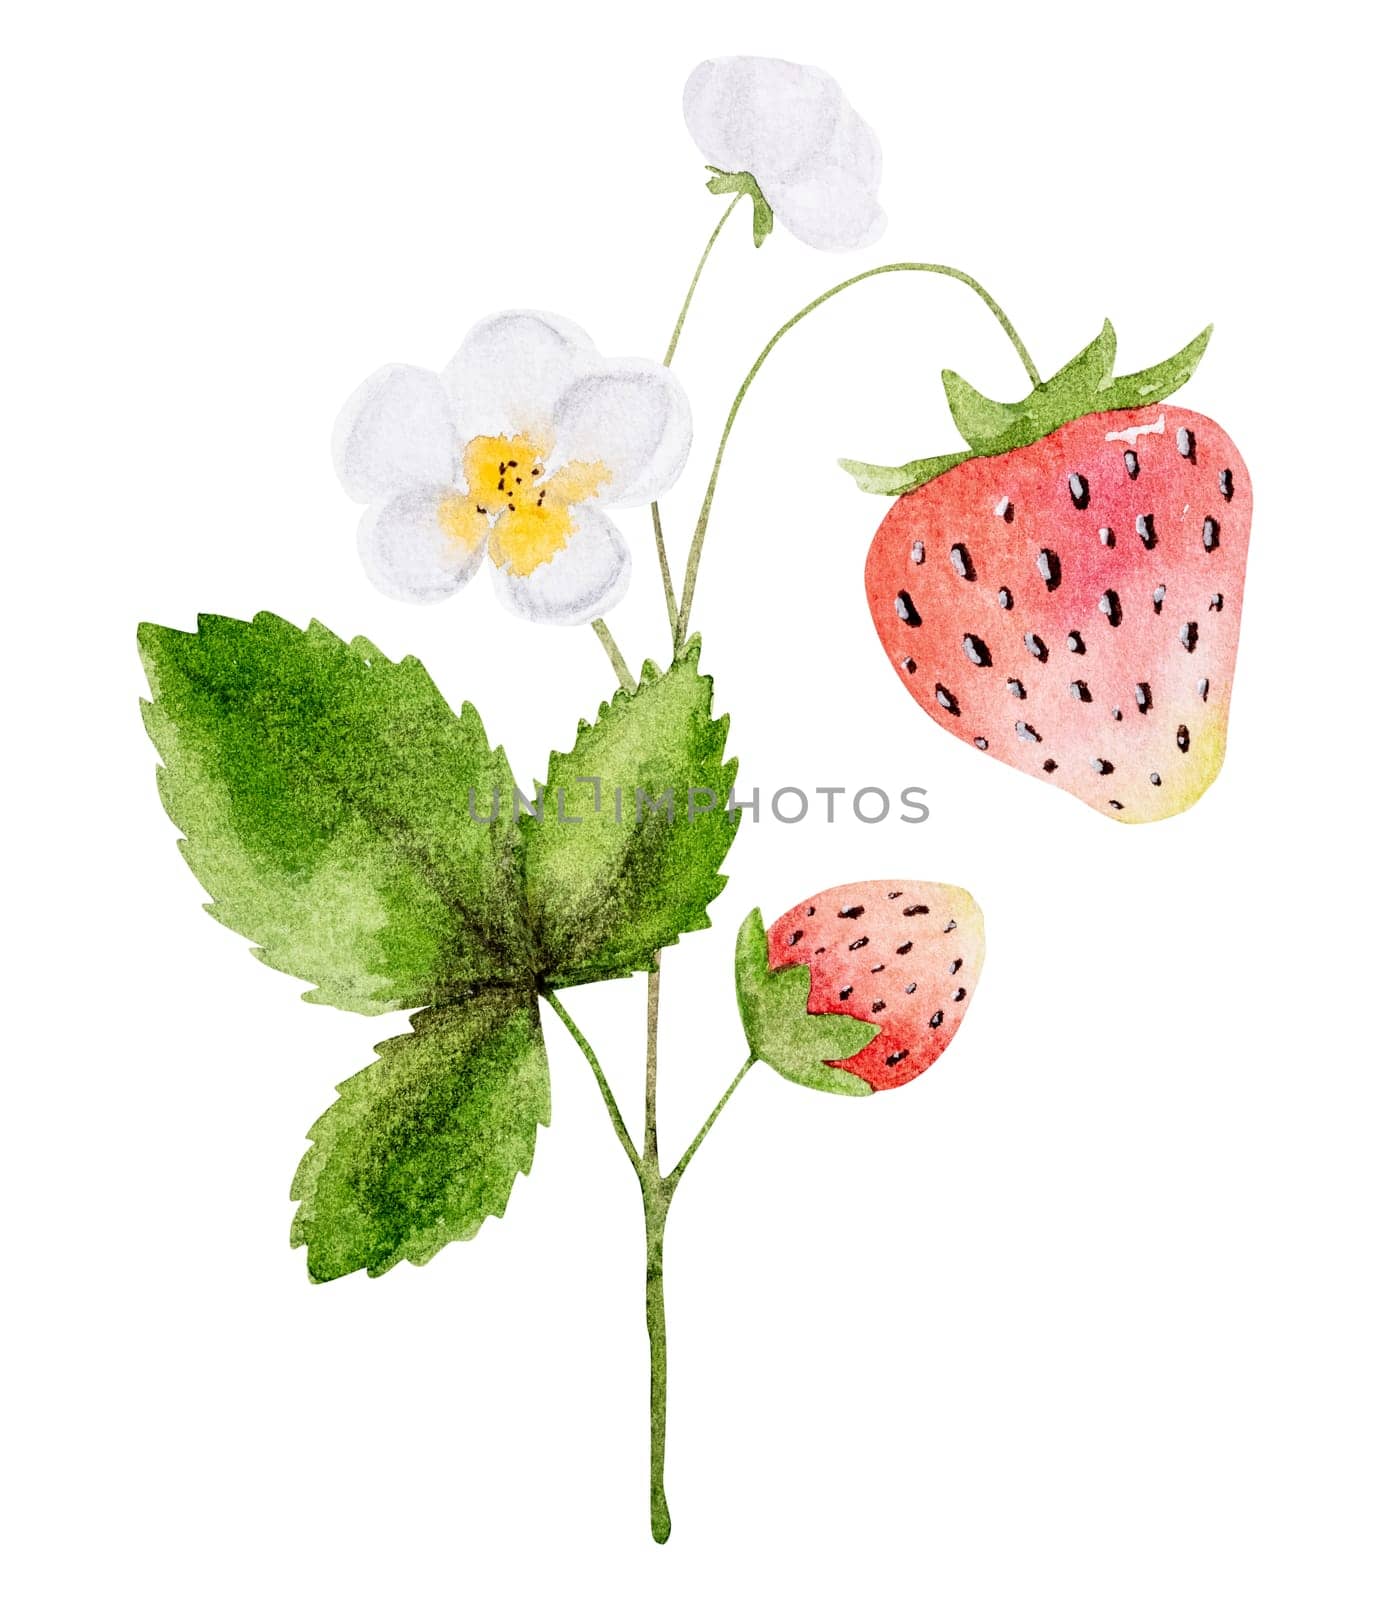 Hand-Drawn Watercolor Illustration Features A Branch With Strawberry Flowers And Berries